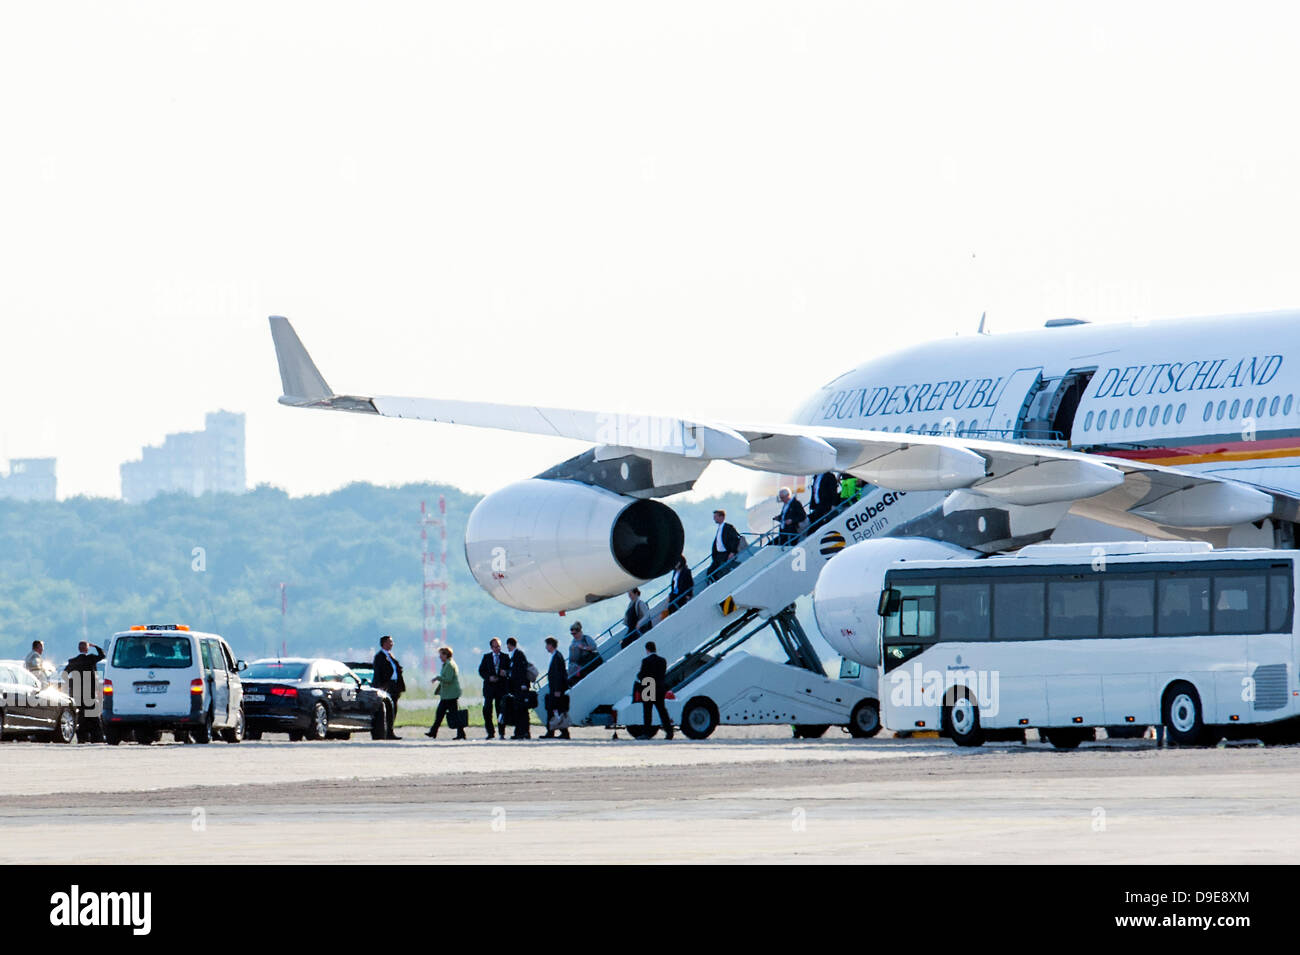 Berlin, Germany. June 18th 2013. Chancellor Angela Merkel arriving in the 'Flugbereitschaft' to Tegel Airport one hour before US President Barack Obama. Credit: Credit:  Gonçalo Silva/Alamy Live News. Stock Photo